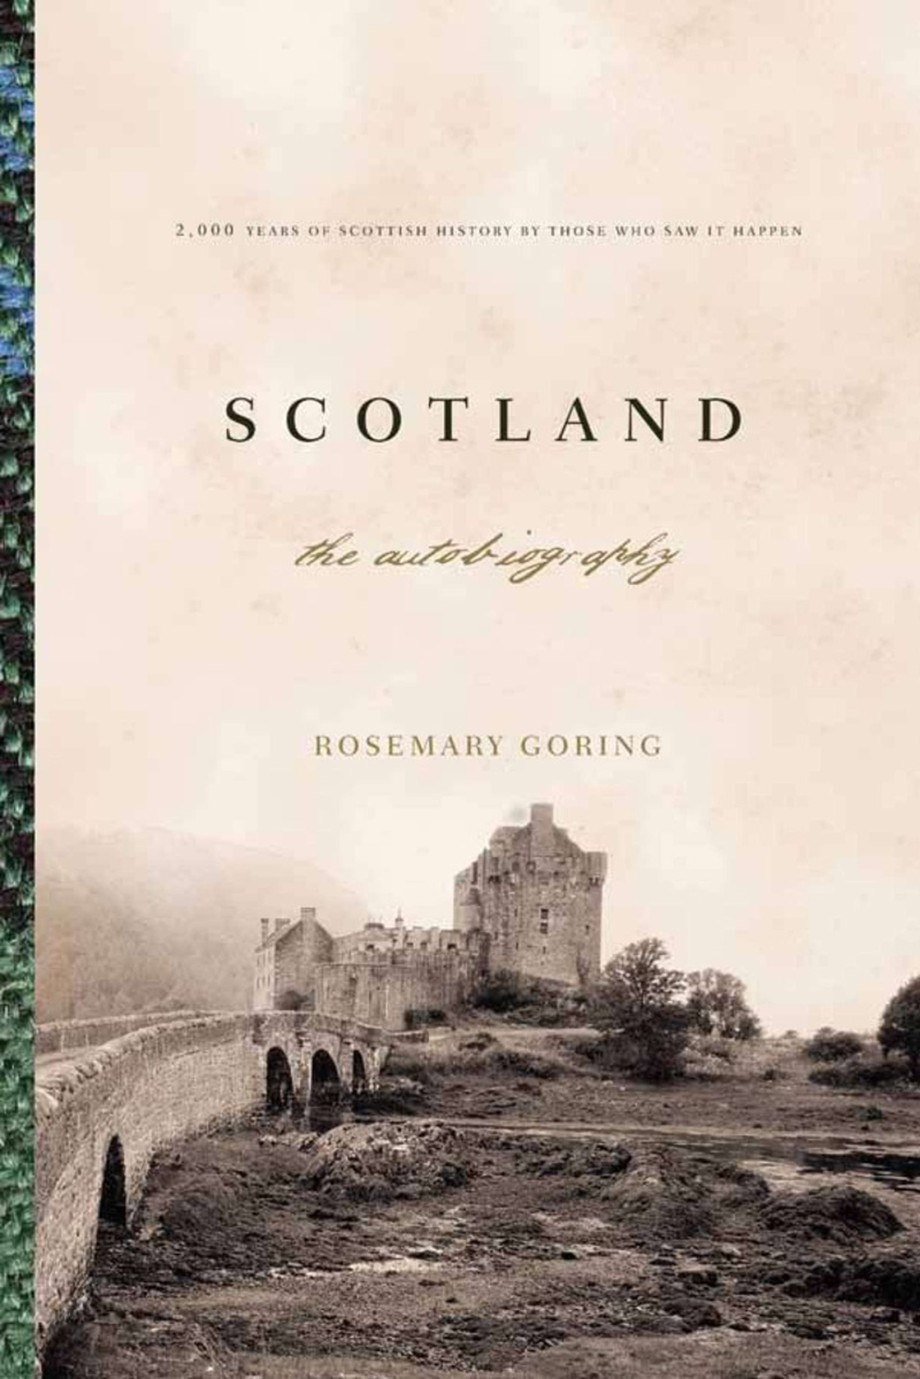 Scotland: An Autobiography 2,000 Years of Scottish History by Those Who Saw It Happen